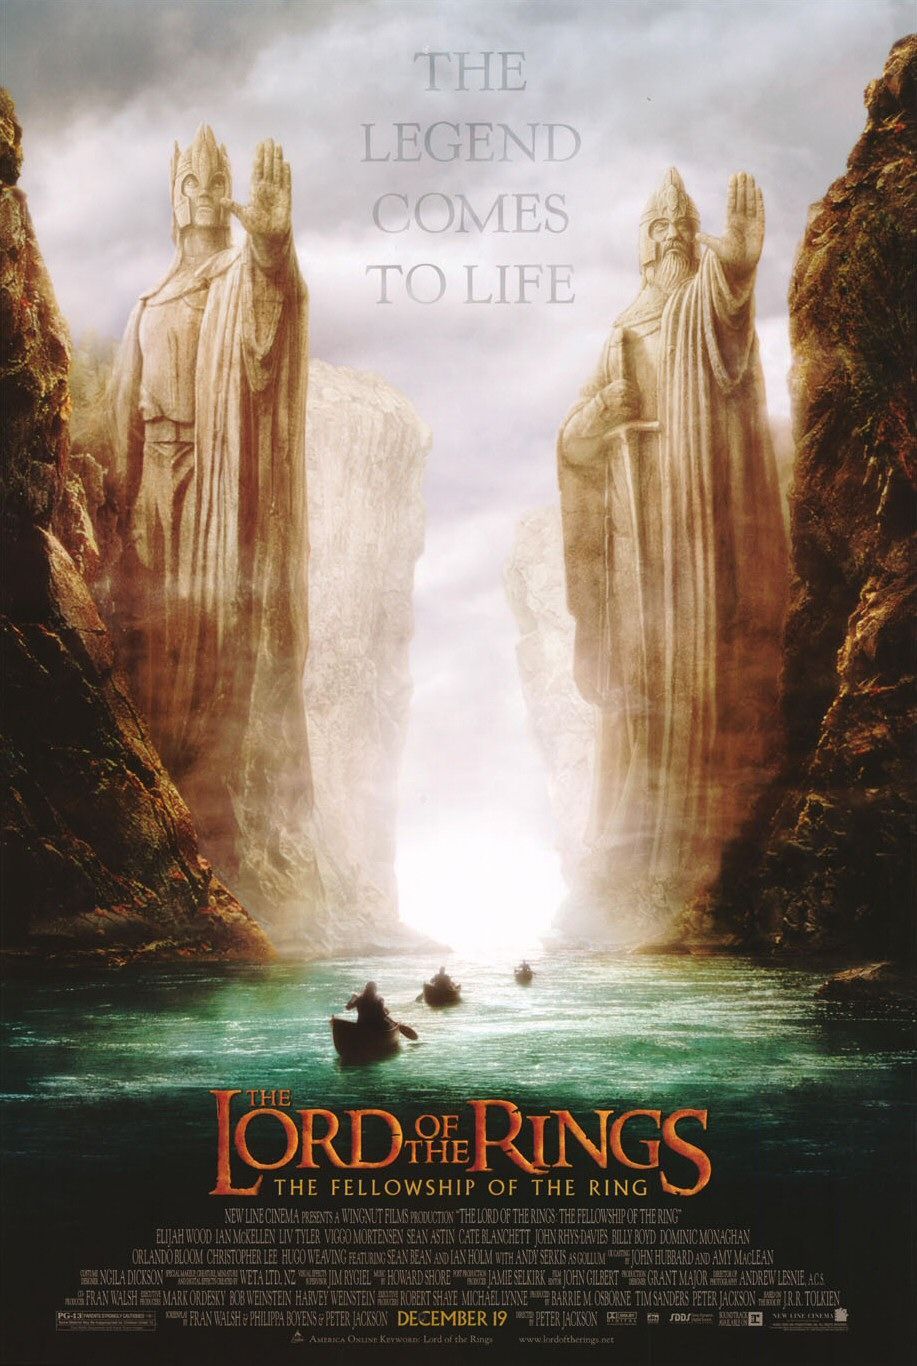 The Lord of the Rings The Fellowship of the Ring - Movies Maniac